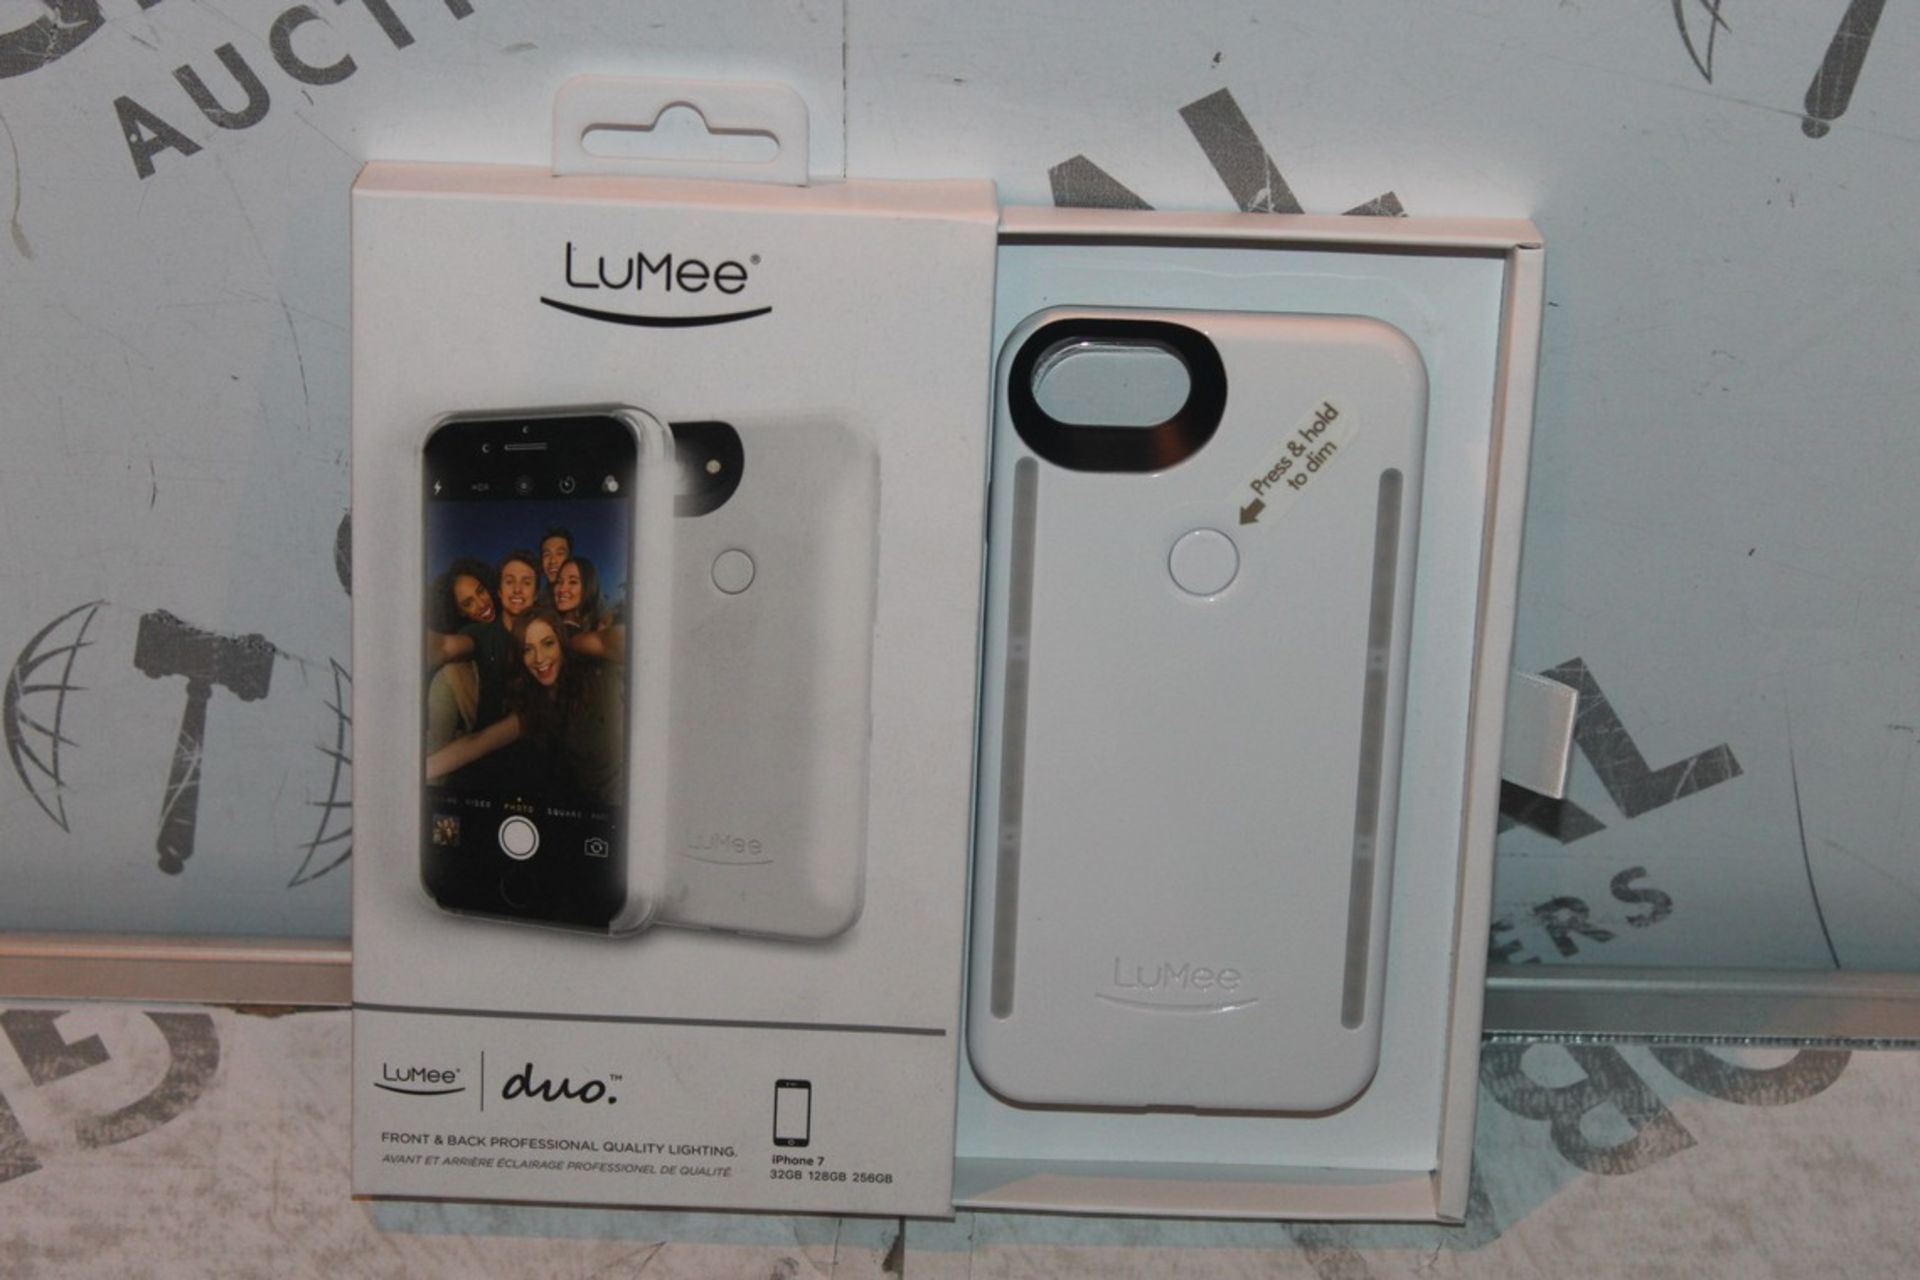 Lot to Contain 2 Lumee Phone Cases With Perfect Lighting for Professionally Lit Selfies, Combined